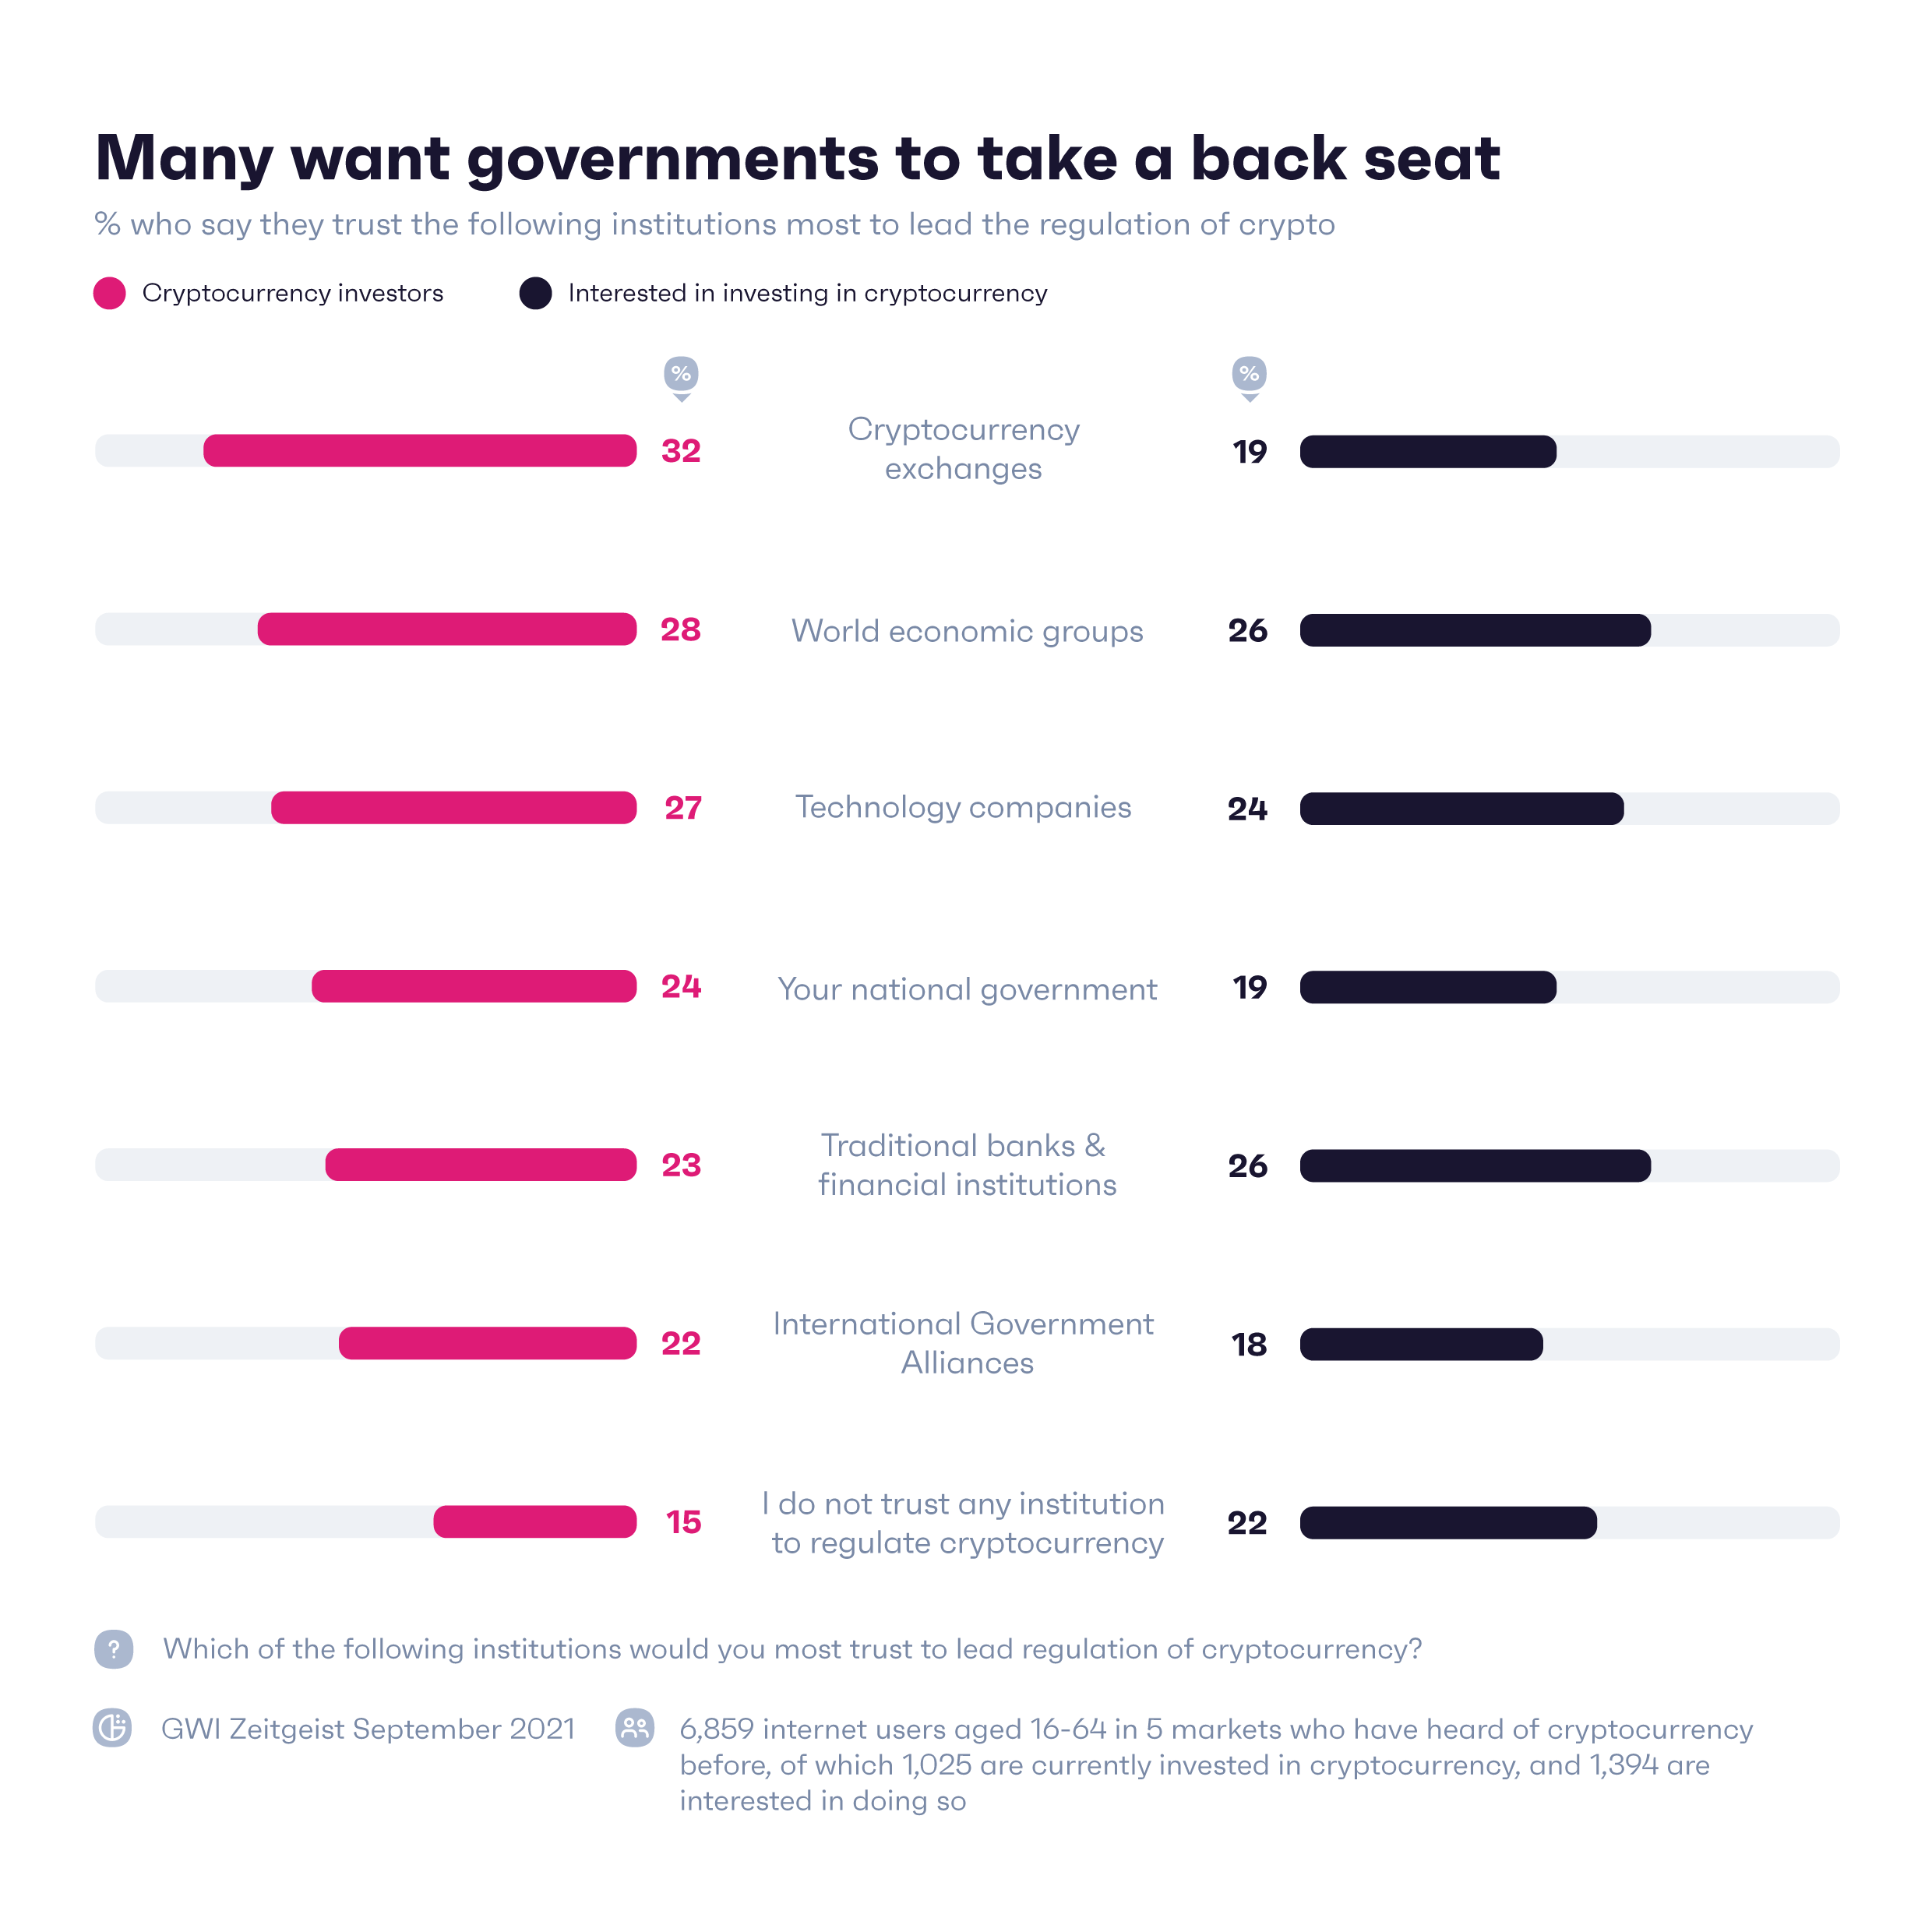 Which of the following institutions would you most trust to lead regulation of cryptocurrency? Answered by internet users aged 16-64 in five markets who are currently invested in crypto, or are interested in doing so (GWI Zeitgeist September 2021)